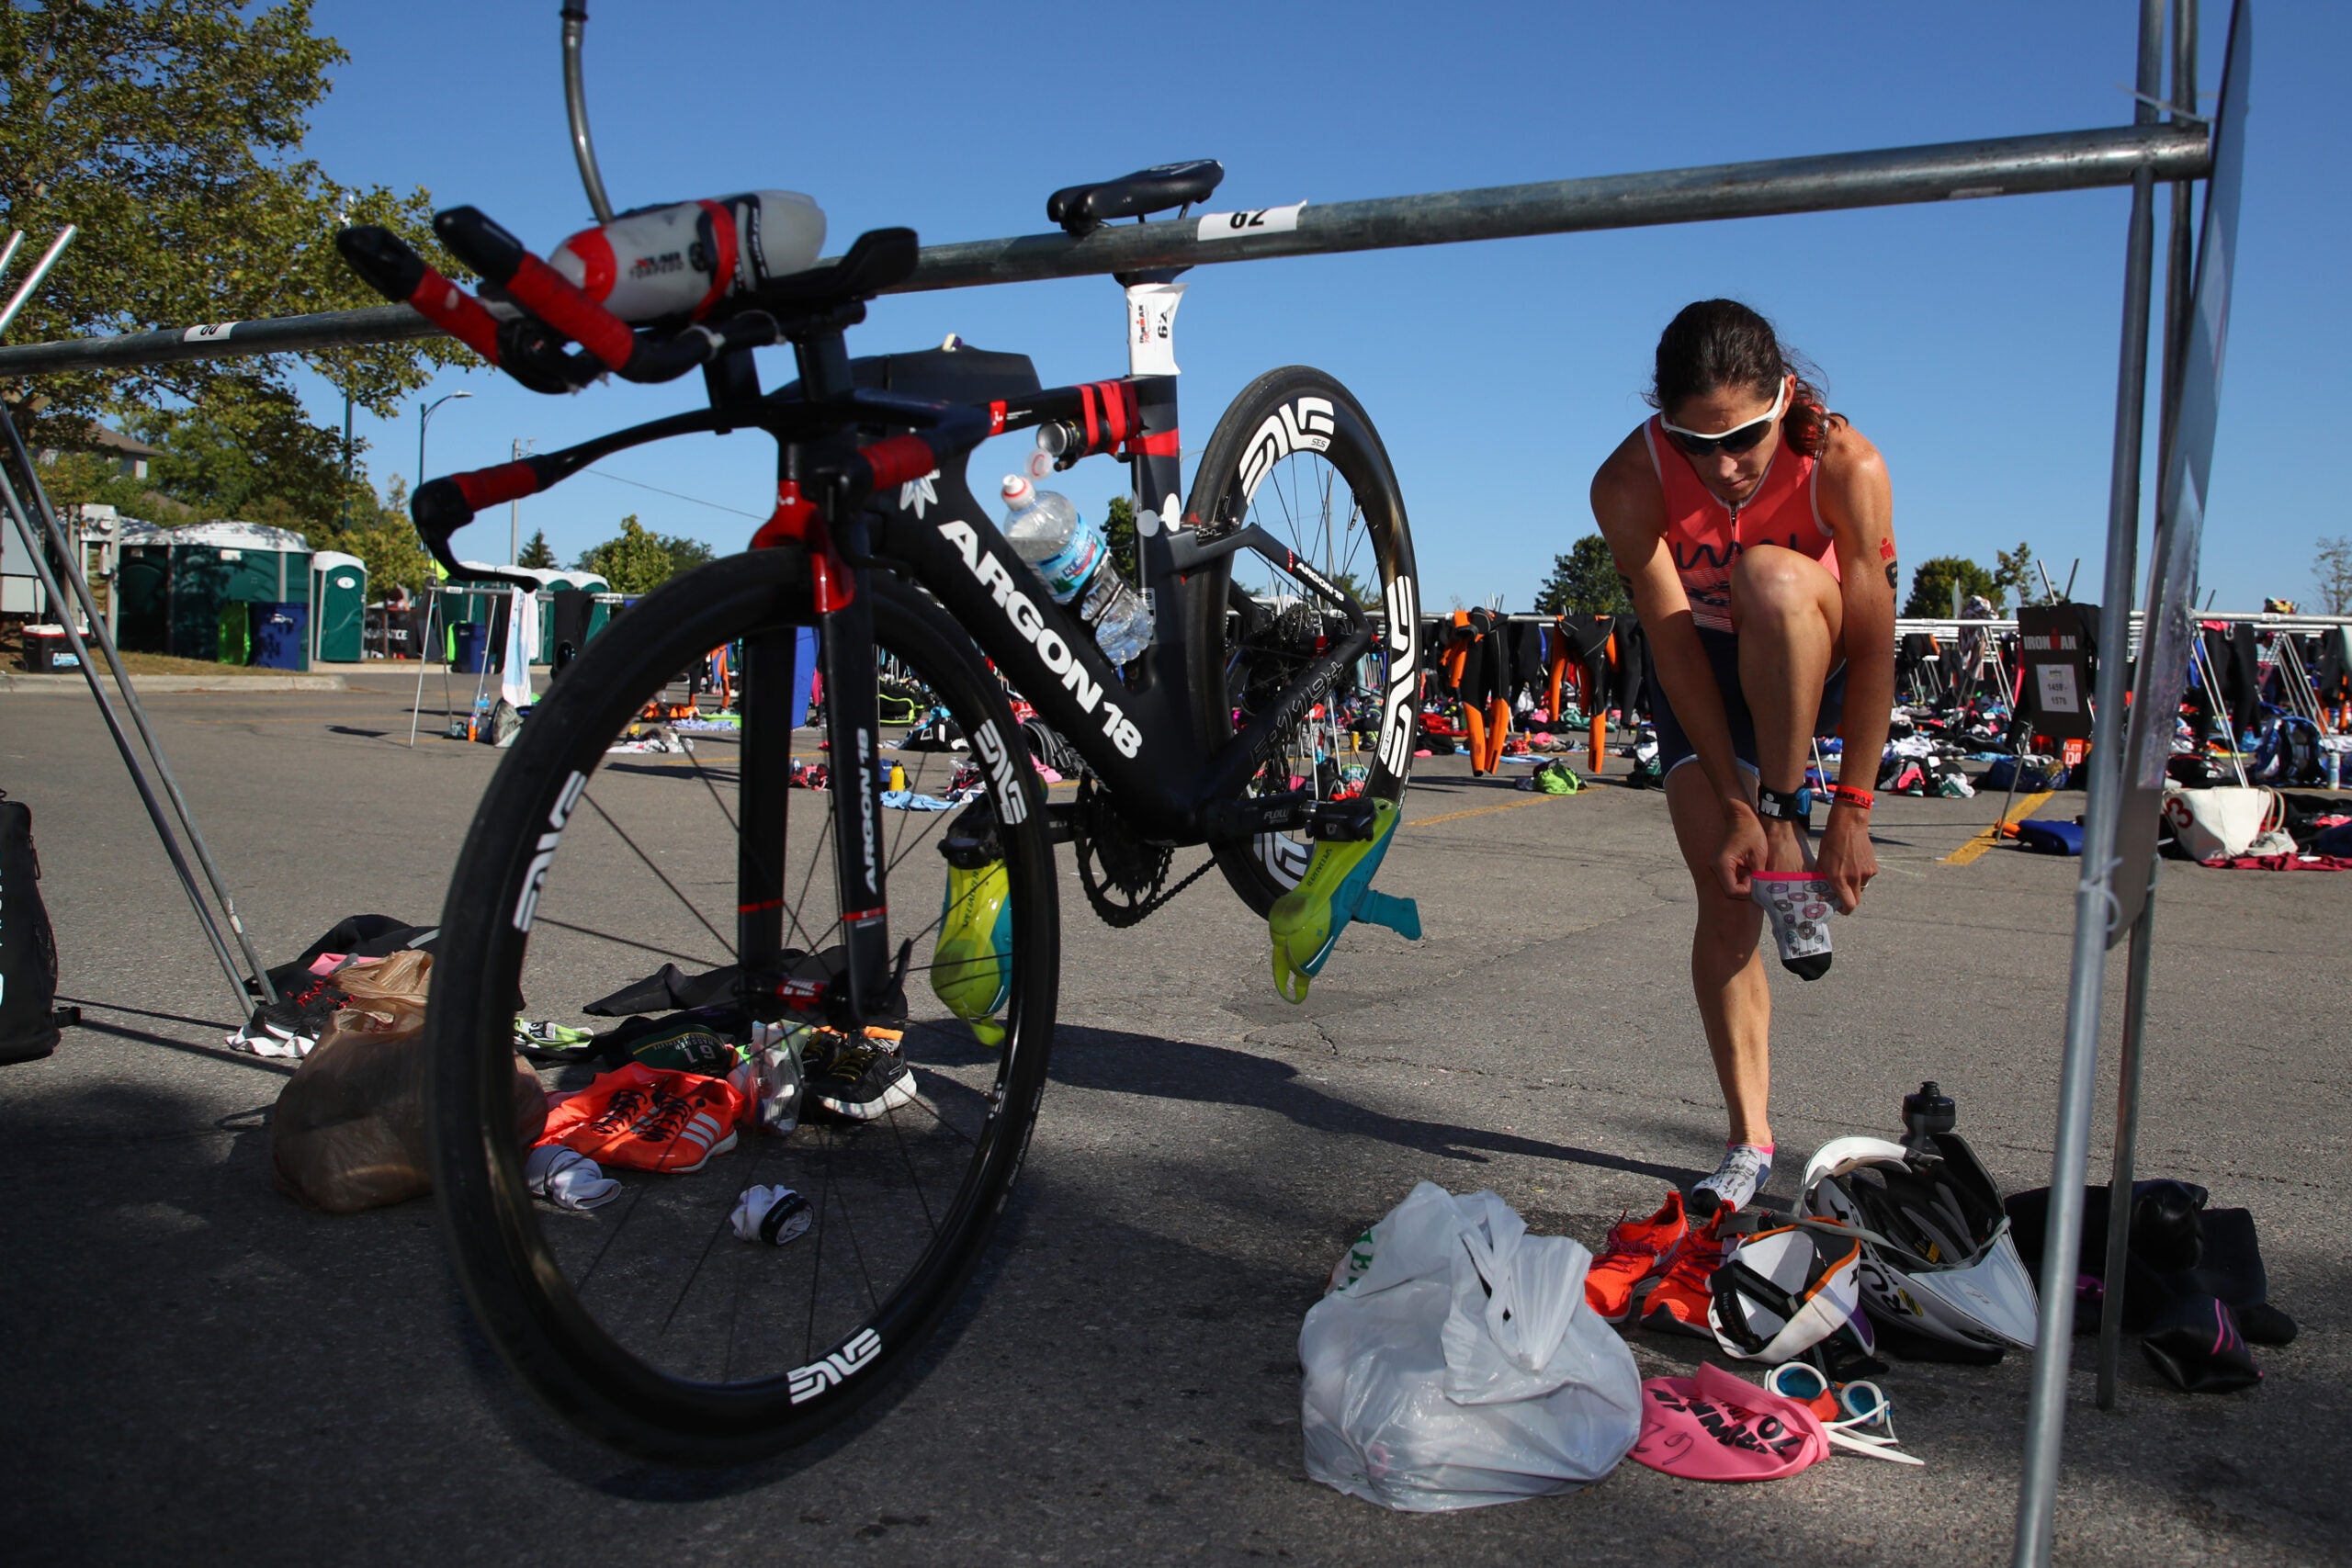 A triathlete does a transition from bike to run